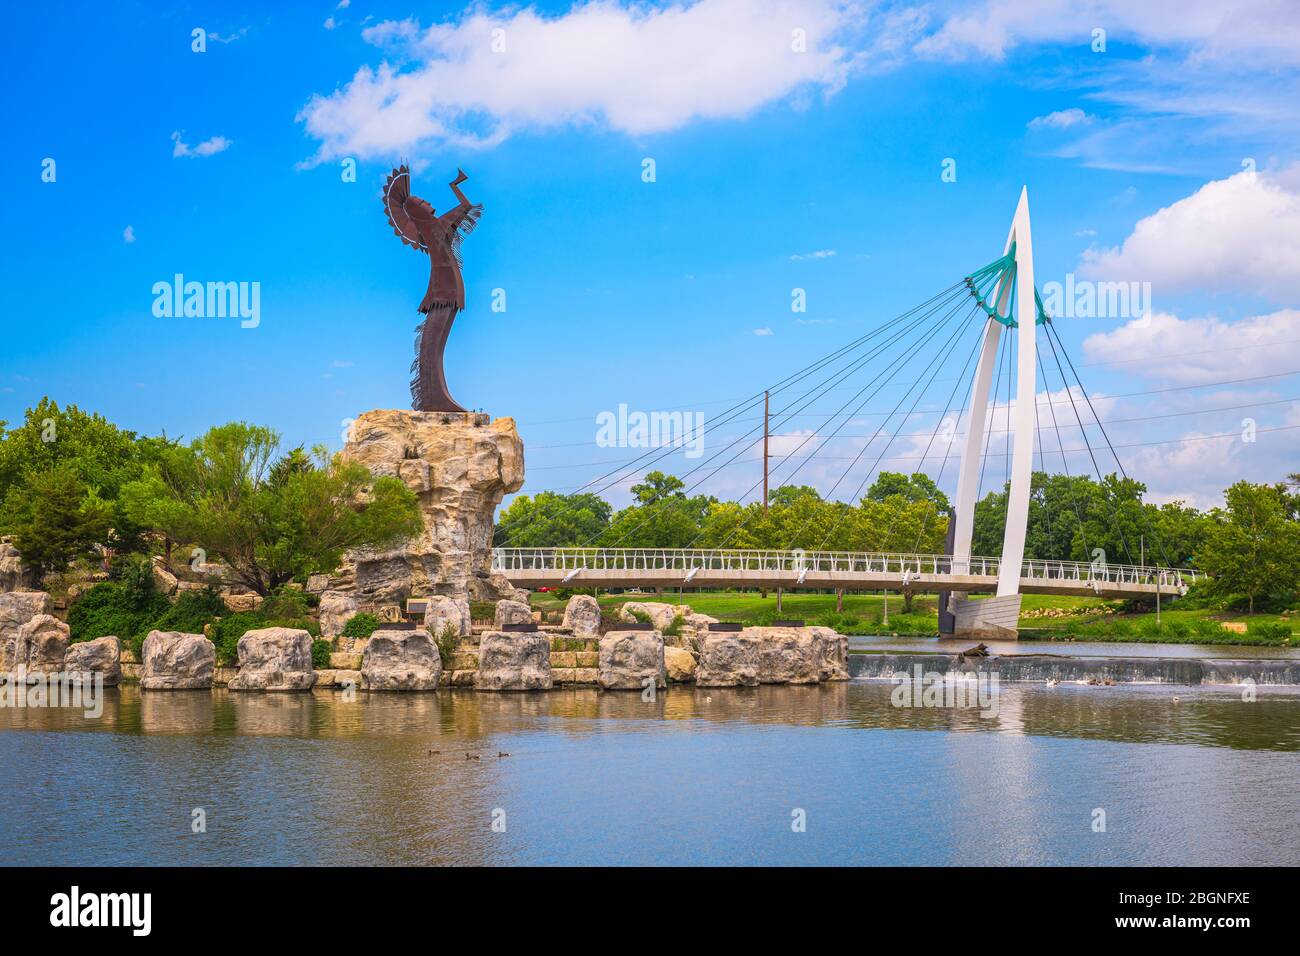 WICHITA, KANSAS - AUGUS 30, 2018: The confluence of the Arkansas and Little Arkansas River at the Keeper of the Plains near downtown Wichita. Stock Photo